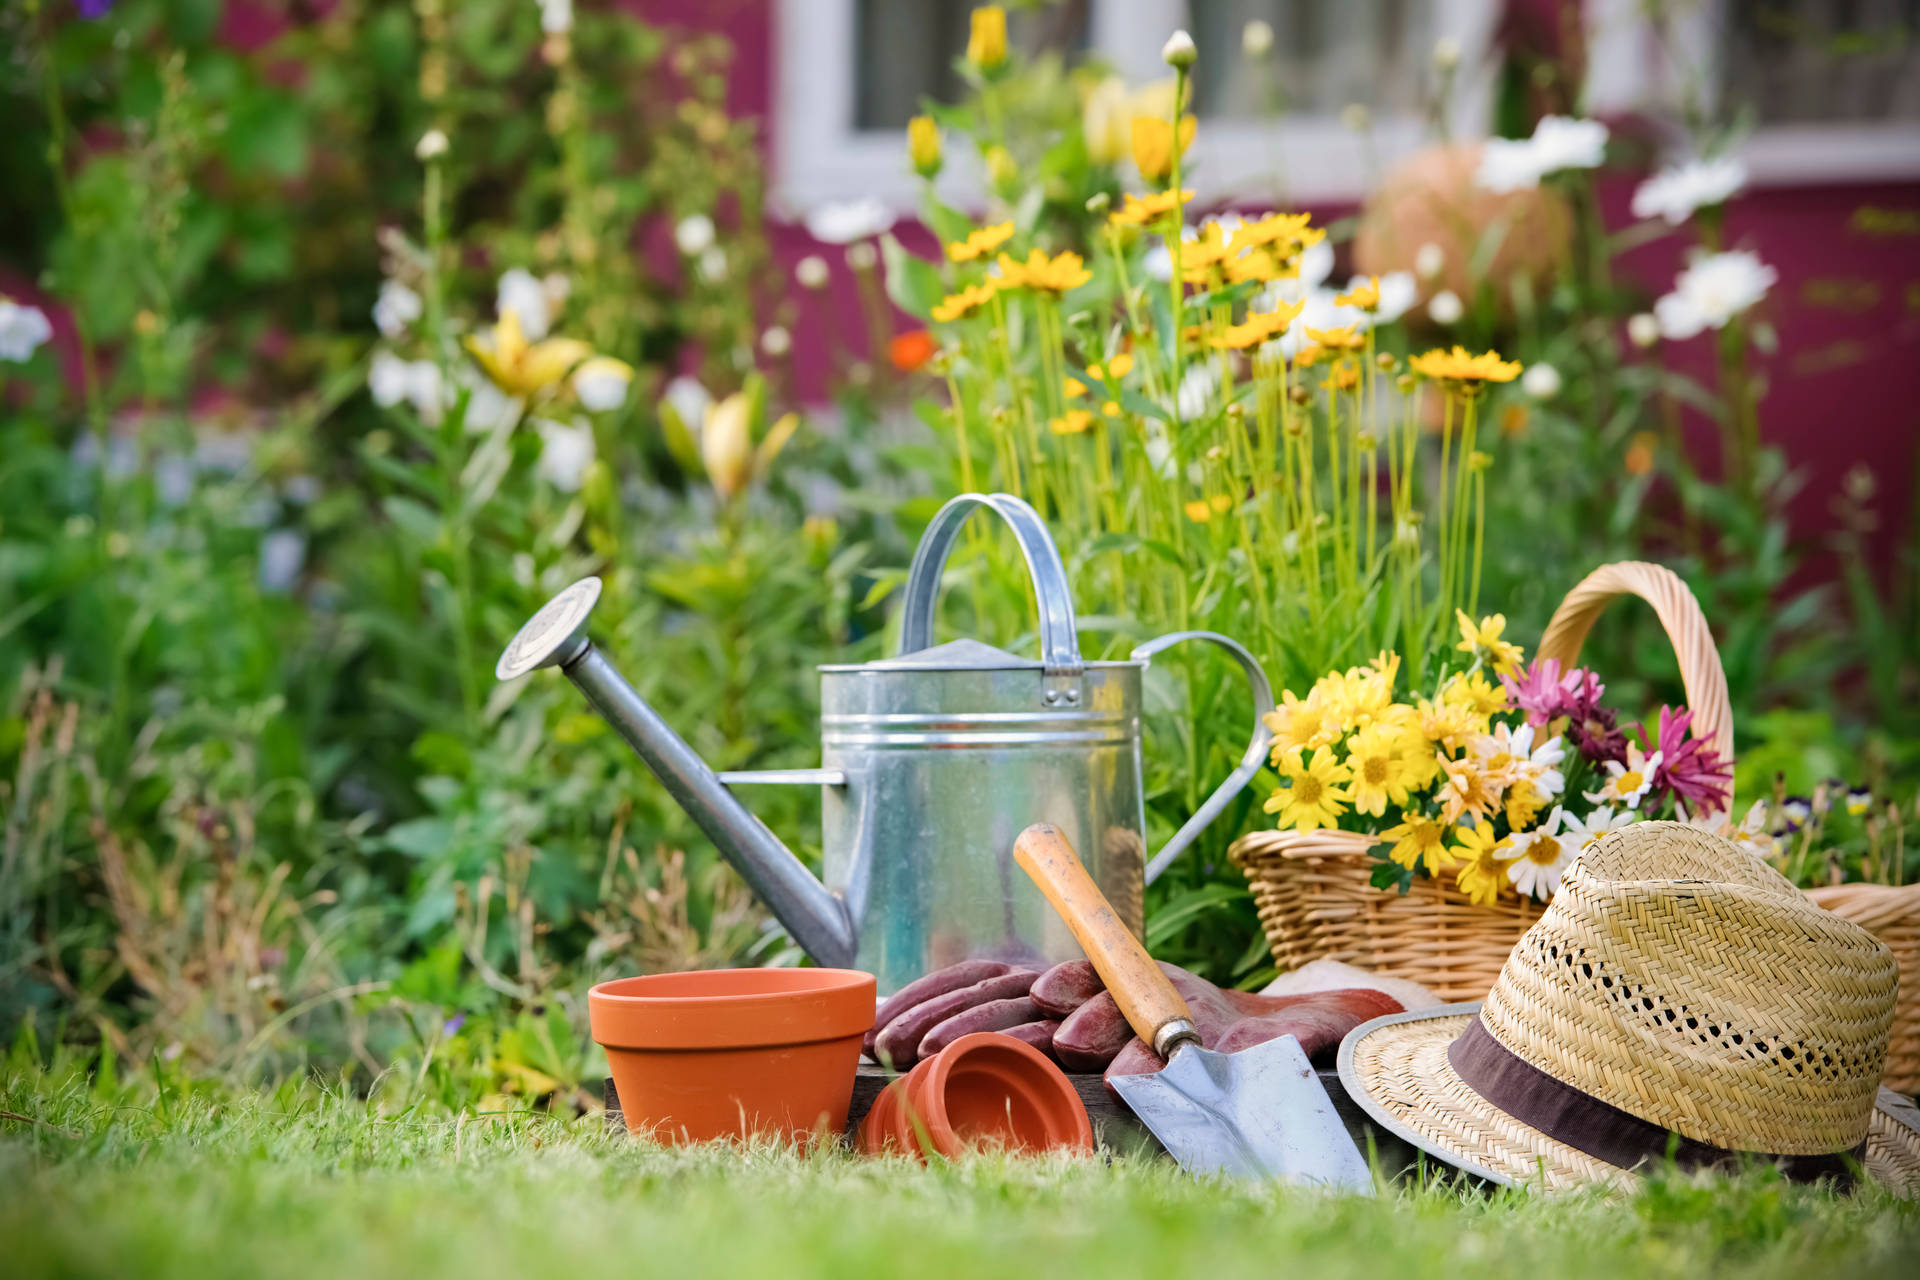 Gardening Tools And Flowers In Backyard Background